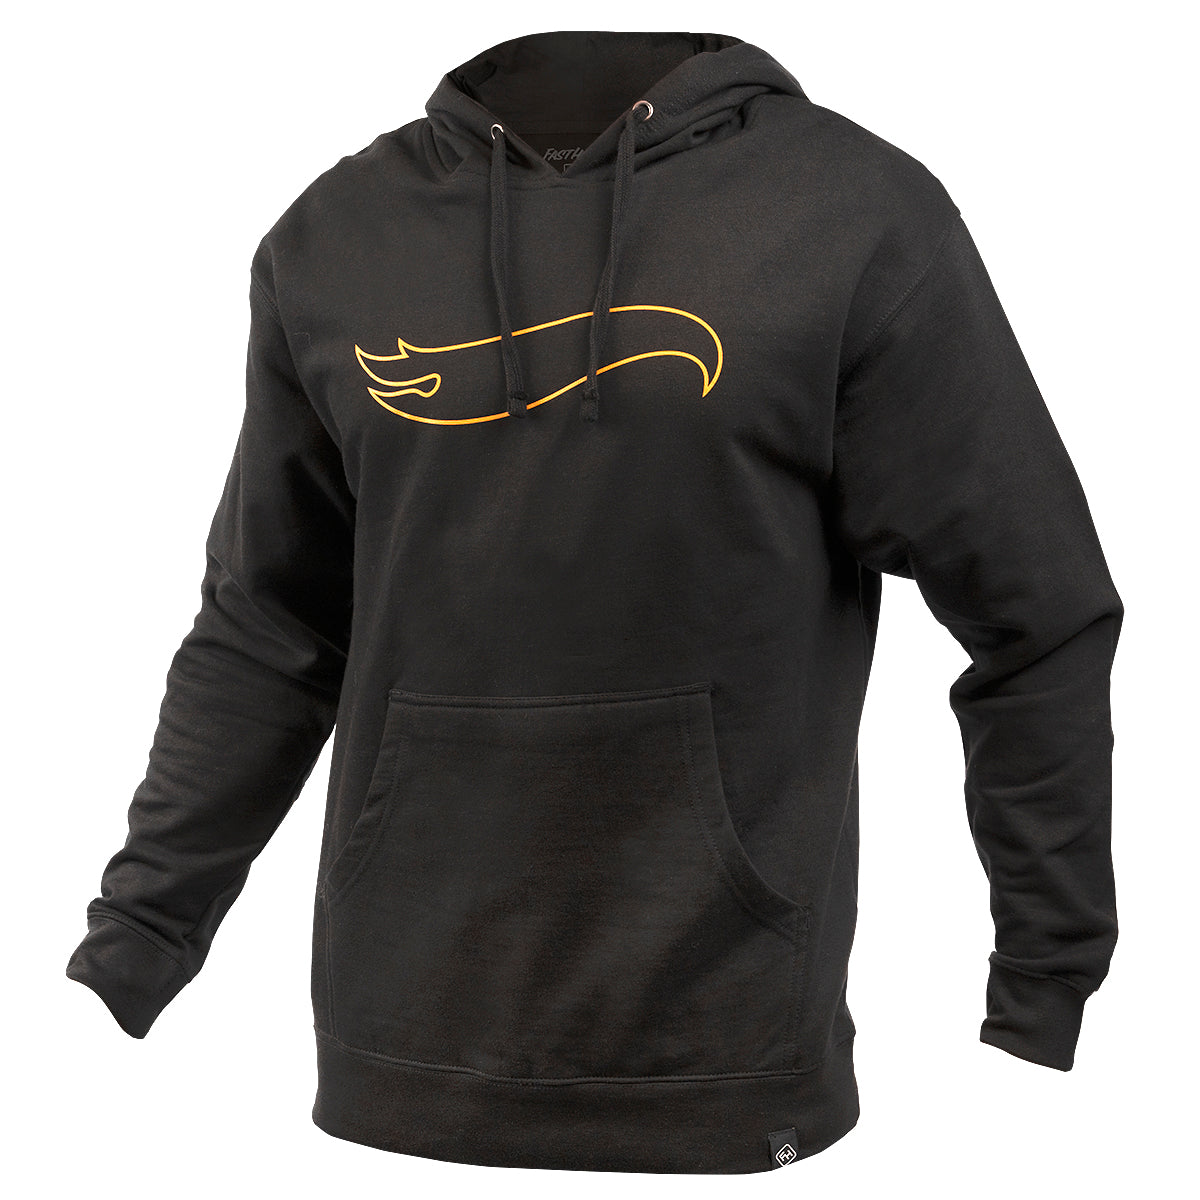 Hot Wheels Synergy Hooded Pullover - Black